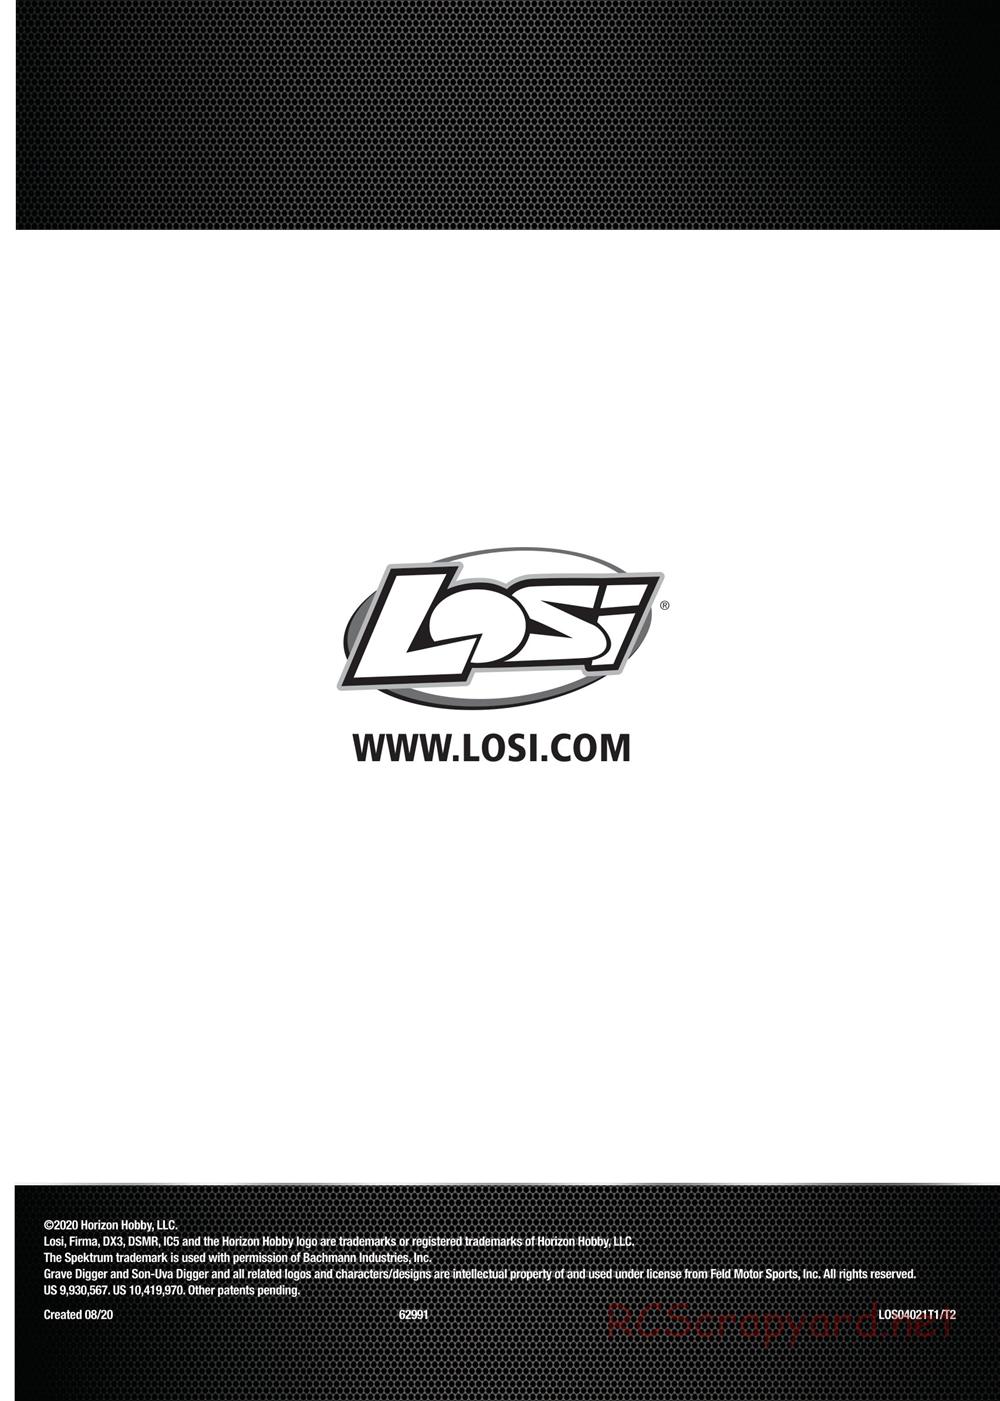 Team Losi - LMT Solid Axle Roller - Manual - Page 19